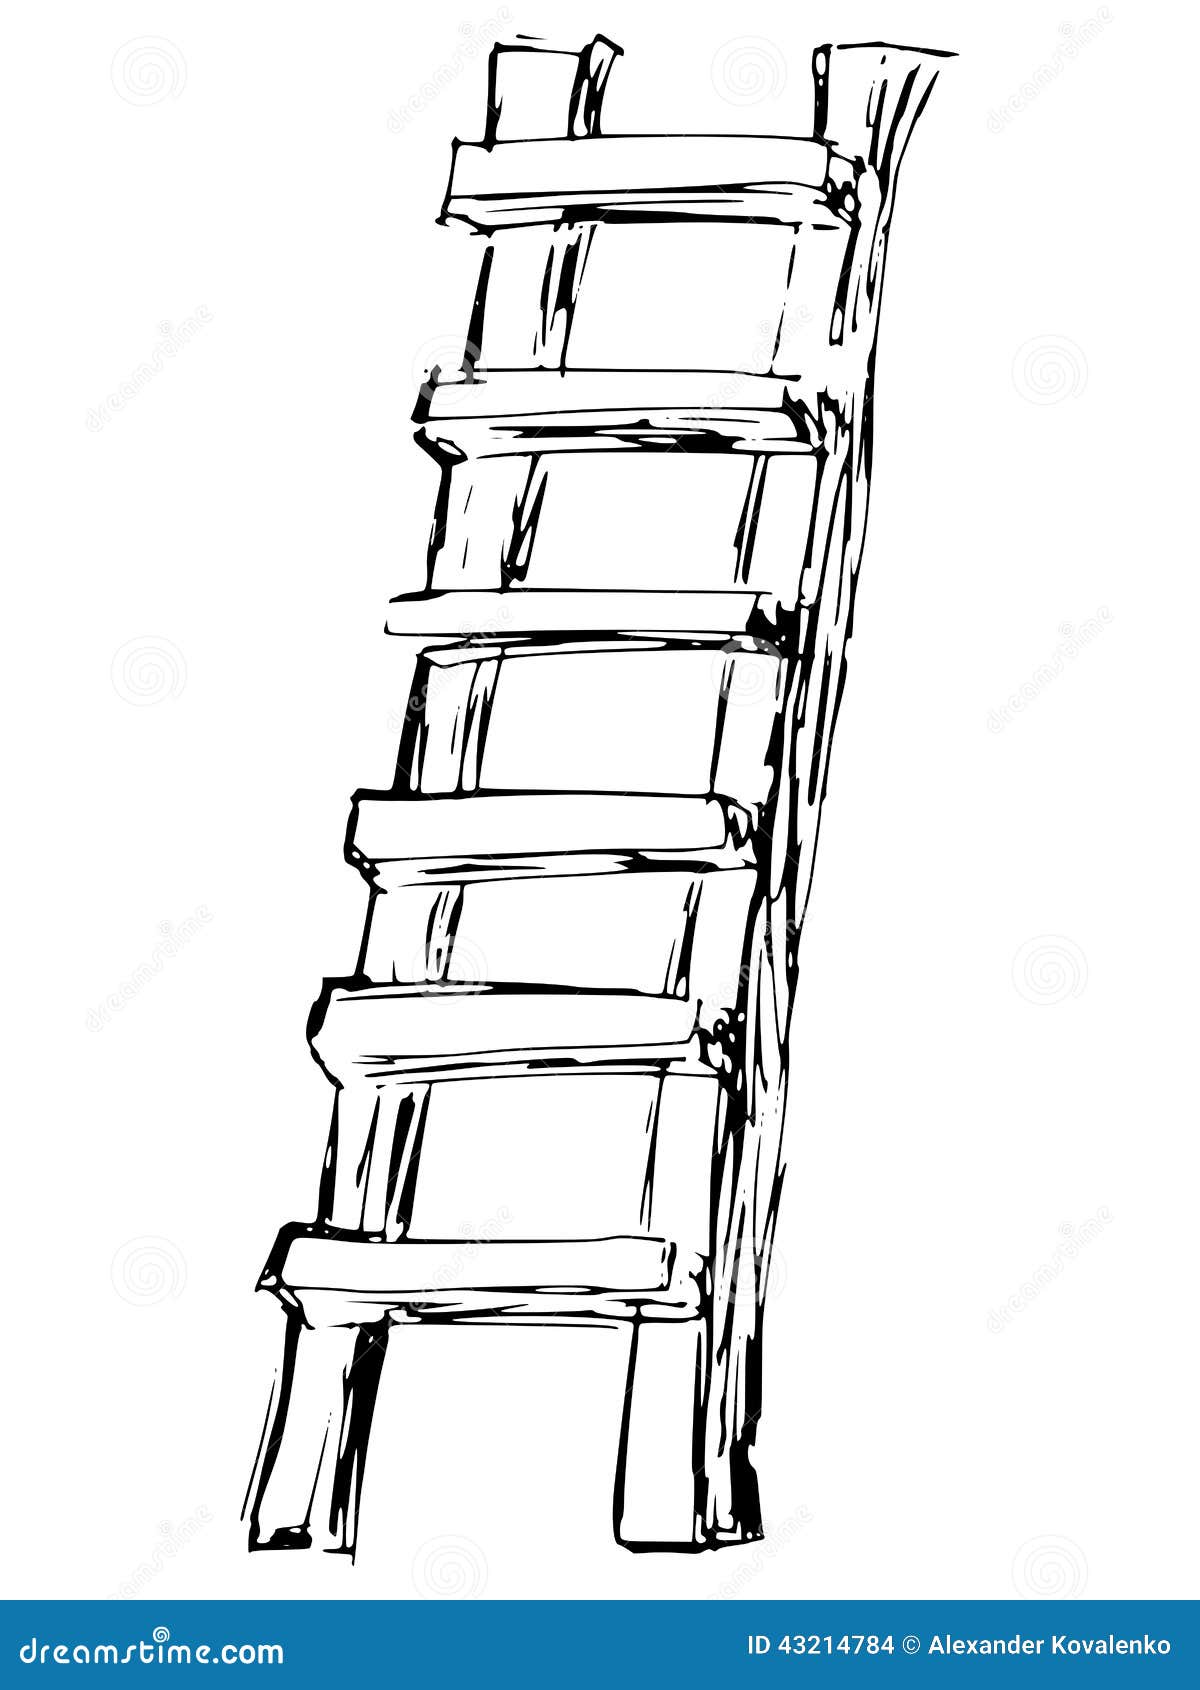 How to draw a Ladder  Ladder drawing step by step  Easy Ladder drawing    YouTube